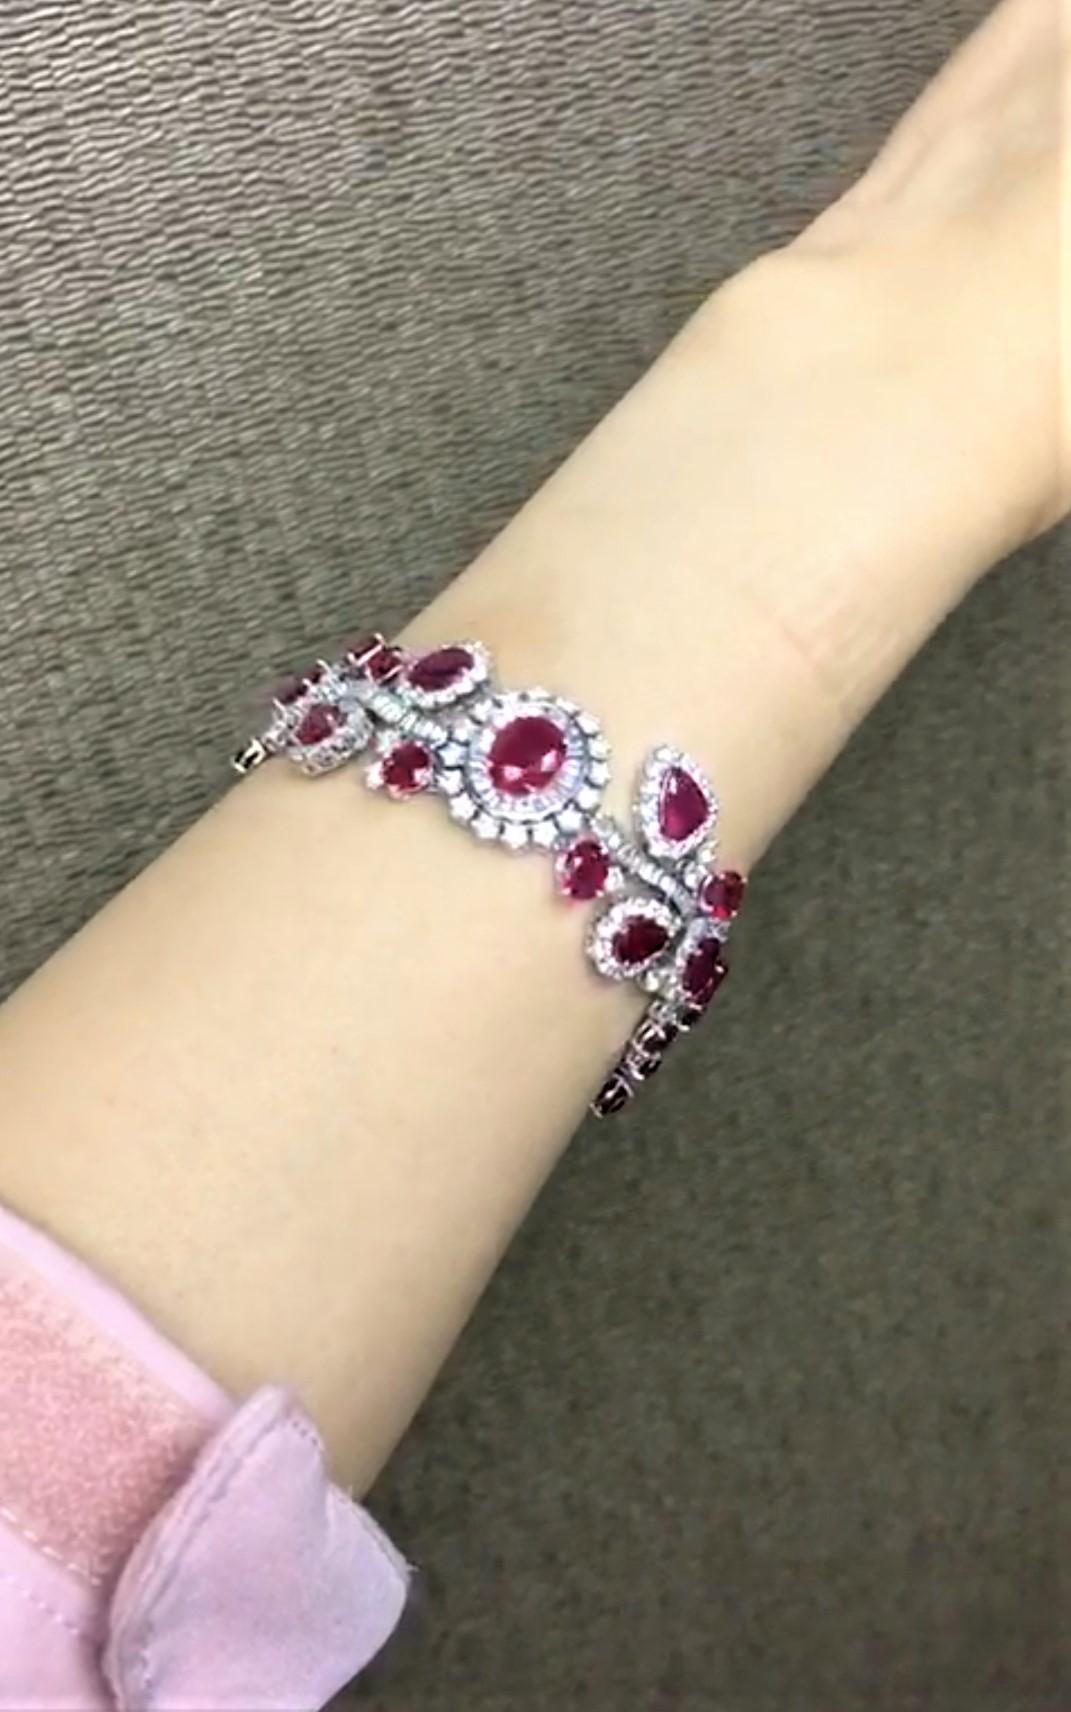 The Following Item we are offering is this Rare Important Radiant 18KT Gold Gorgeous Glittering and Sparkling Magnificent Fancy Rare Burmese Ruby and Diamond Bracelet. Bracelet contains approx 28CTS of Beautiful Fancy Burmese Rubies and Diamonds!!!